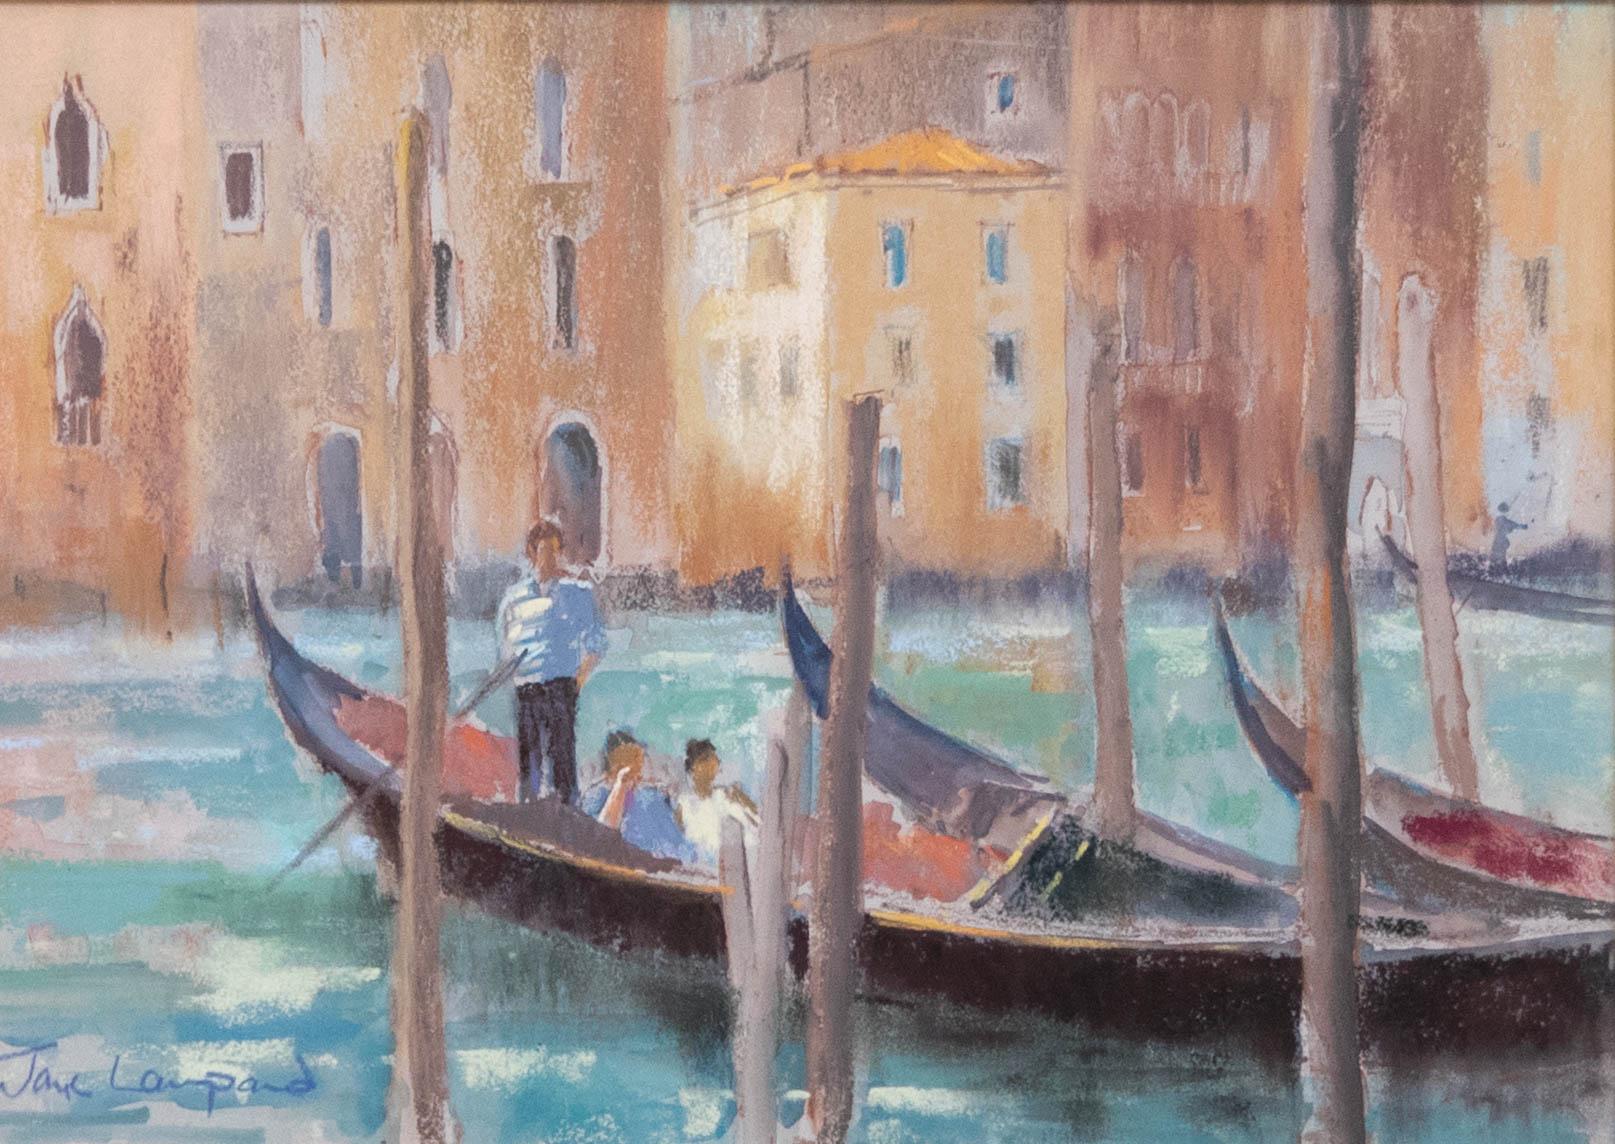 Jane Lampard - Framed Contemporary Pastel, Gondolas, Grand Canal, Venice - Art by Unknown